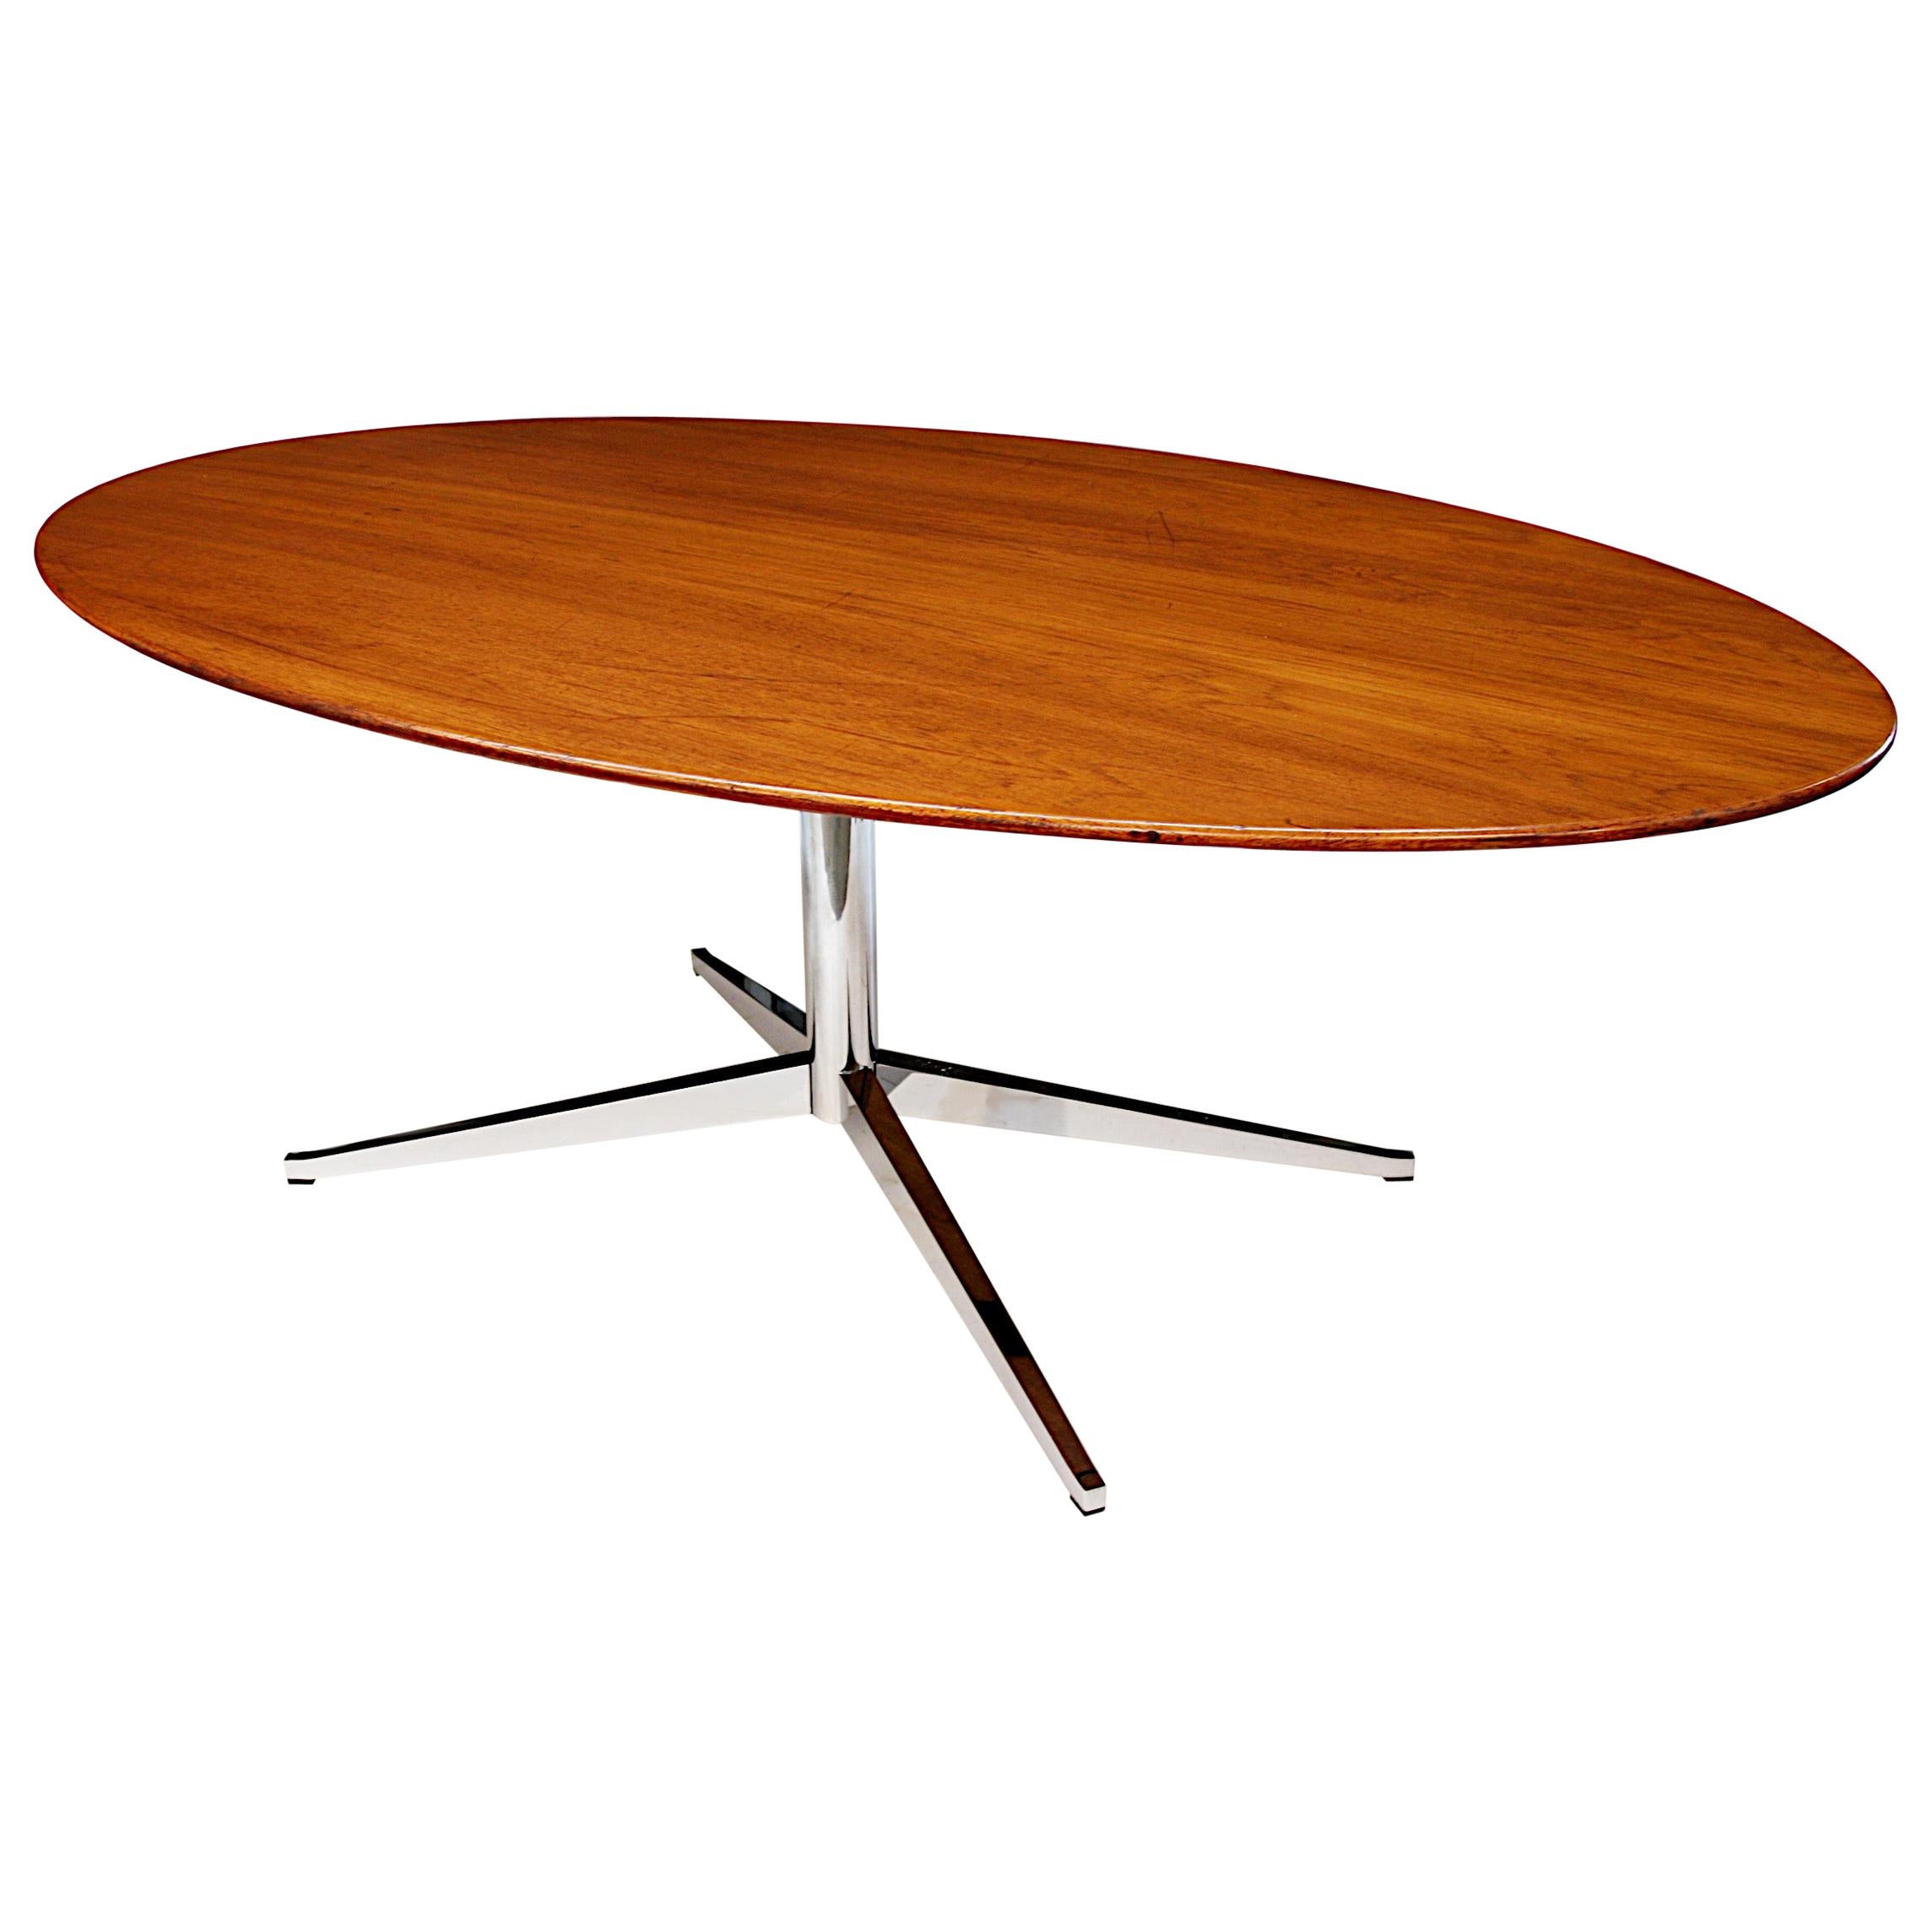 1960s Mid-Century Modern Oval Oak Dining Conference Table Desk by Florence Knoll